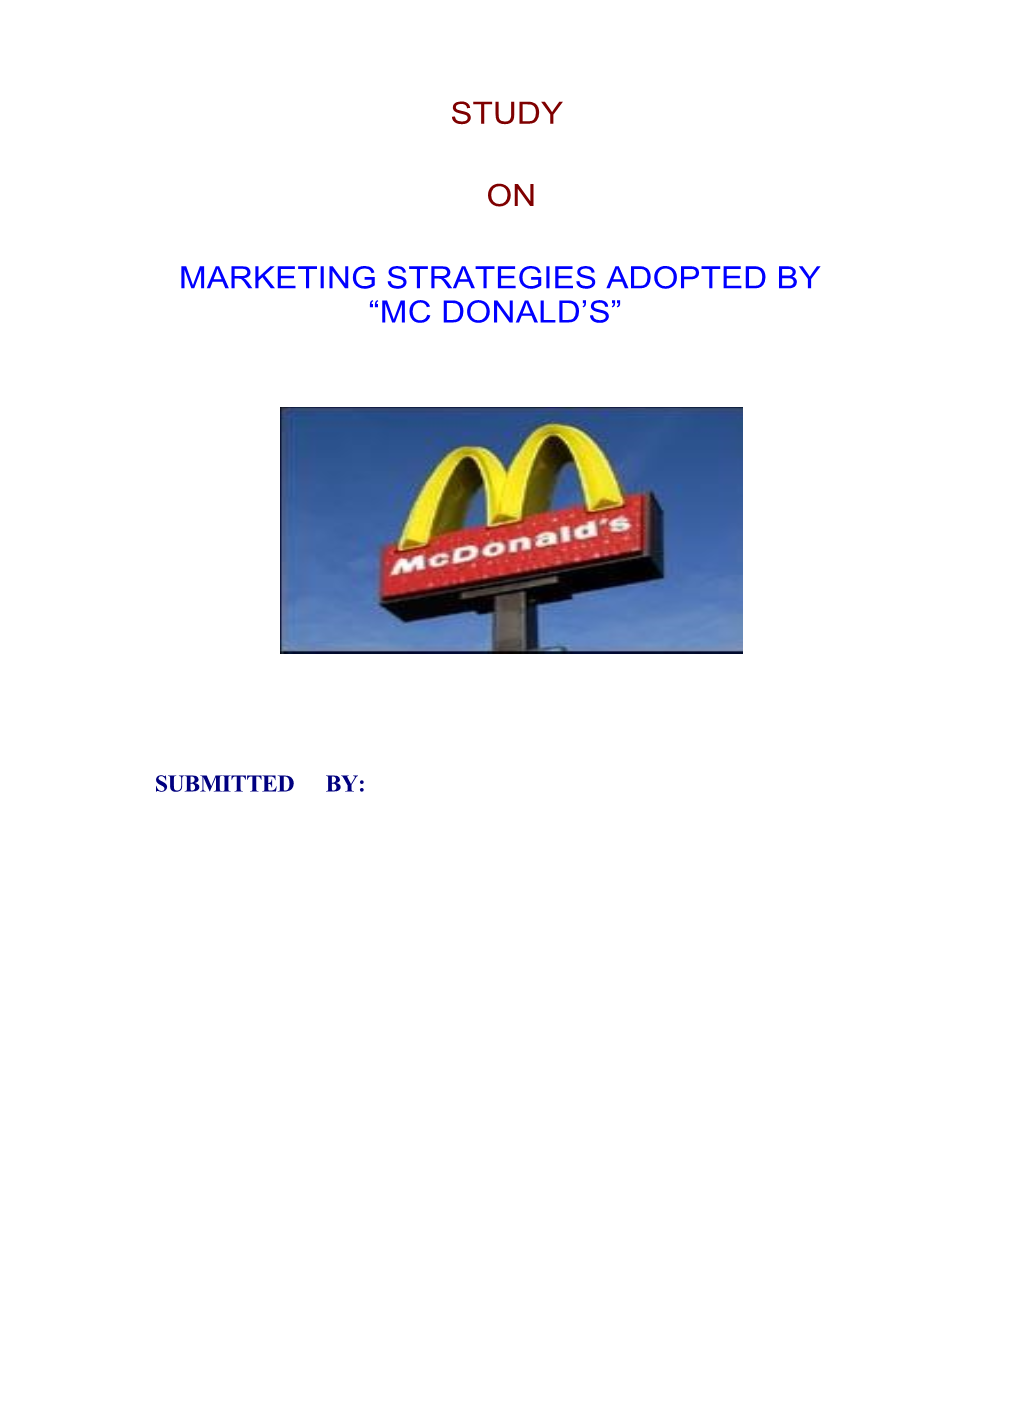 Study on Marketing Strategies Adopted by “Mc